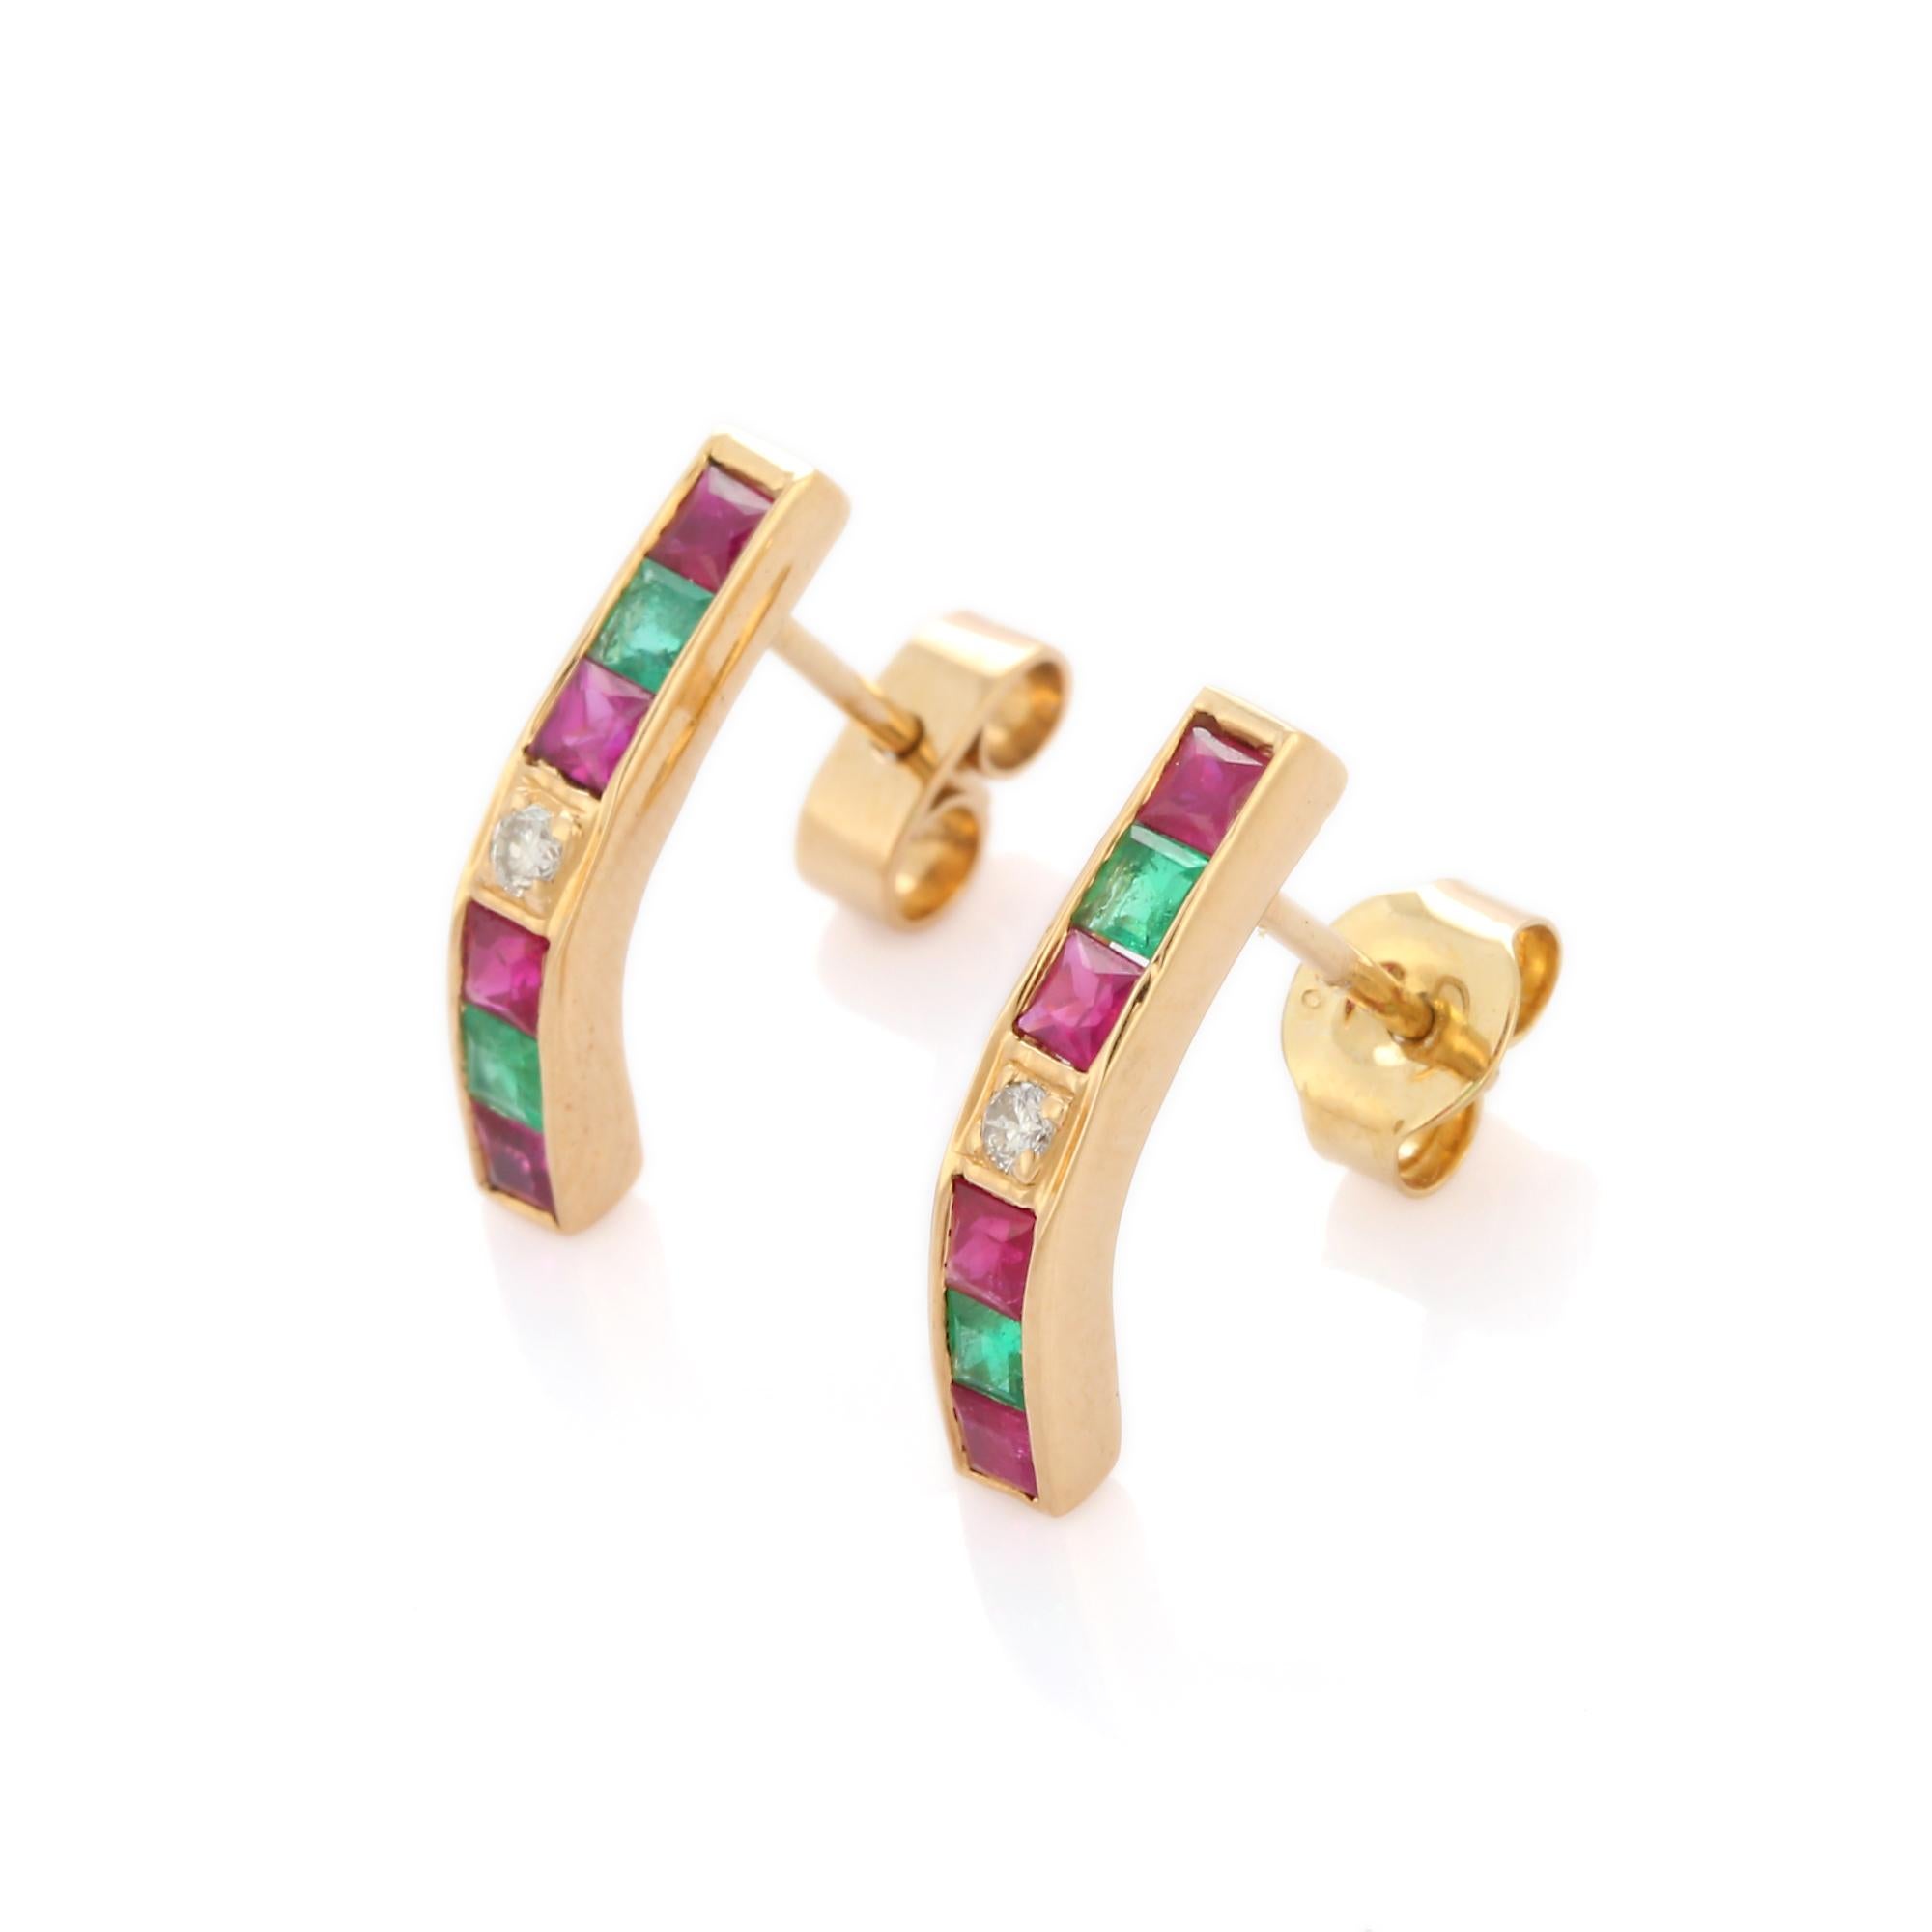 Studs create a subtle beauty while showcasing the colors of the natural precious gemstones and illuminating diamonds making a statement.

Square cut emerald and ruby studs with diamonds in 18K gold. Embrace your look with these stunning pair of